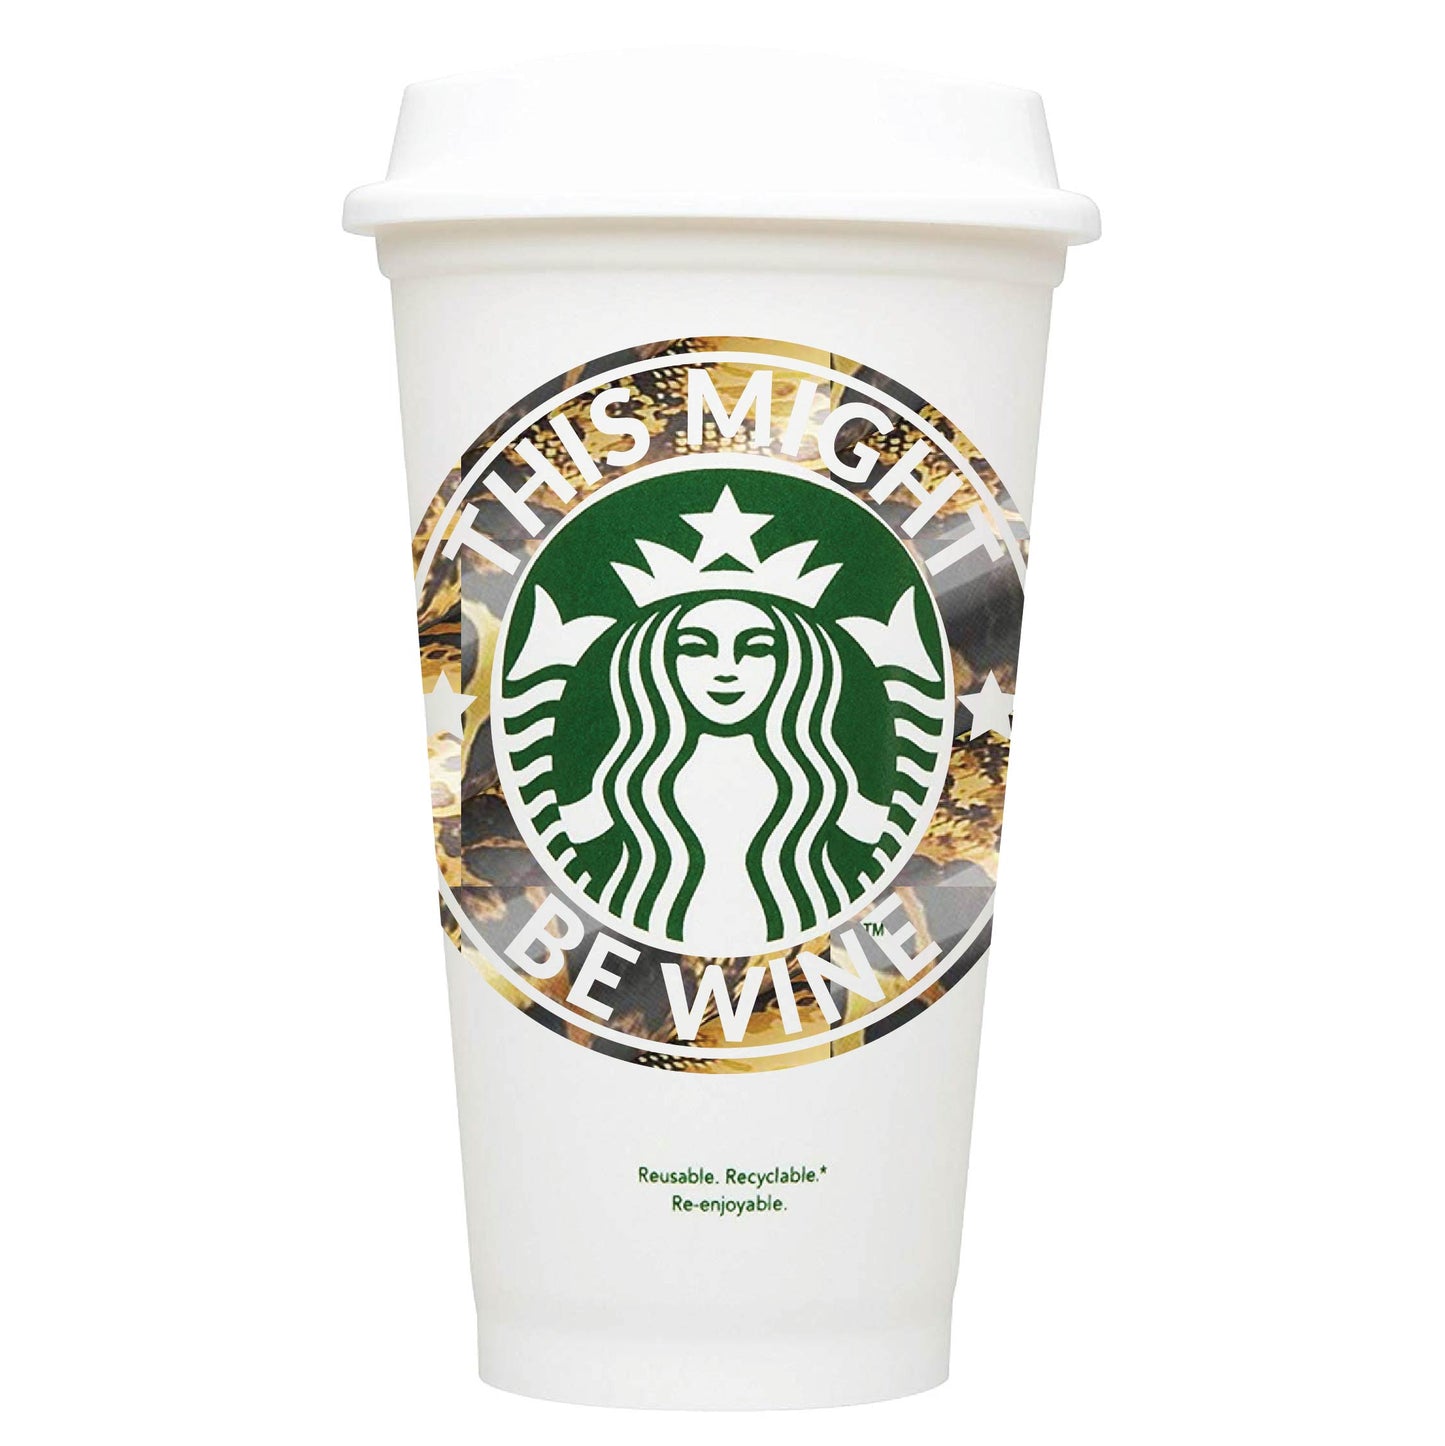 This Might Be Wine Starbucks Hot Cup